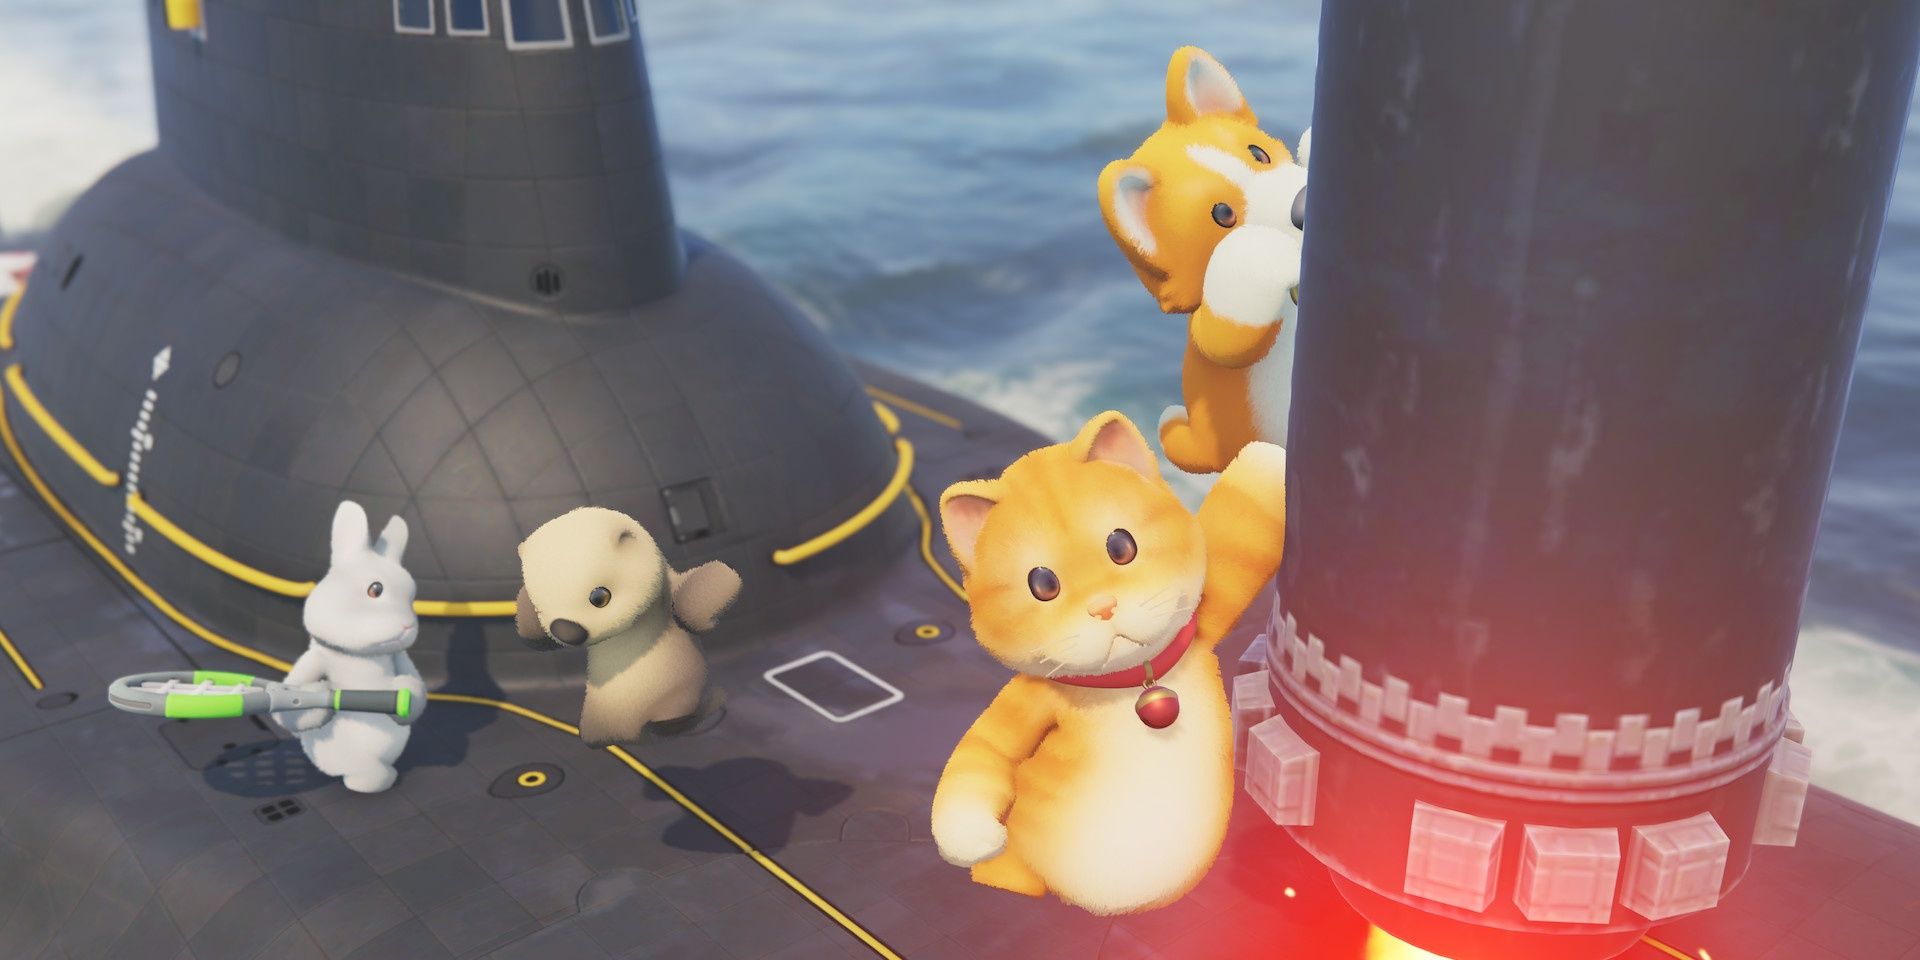 party animals match onboard a submarine